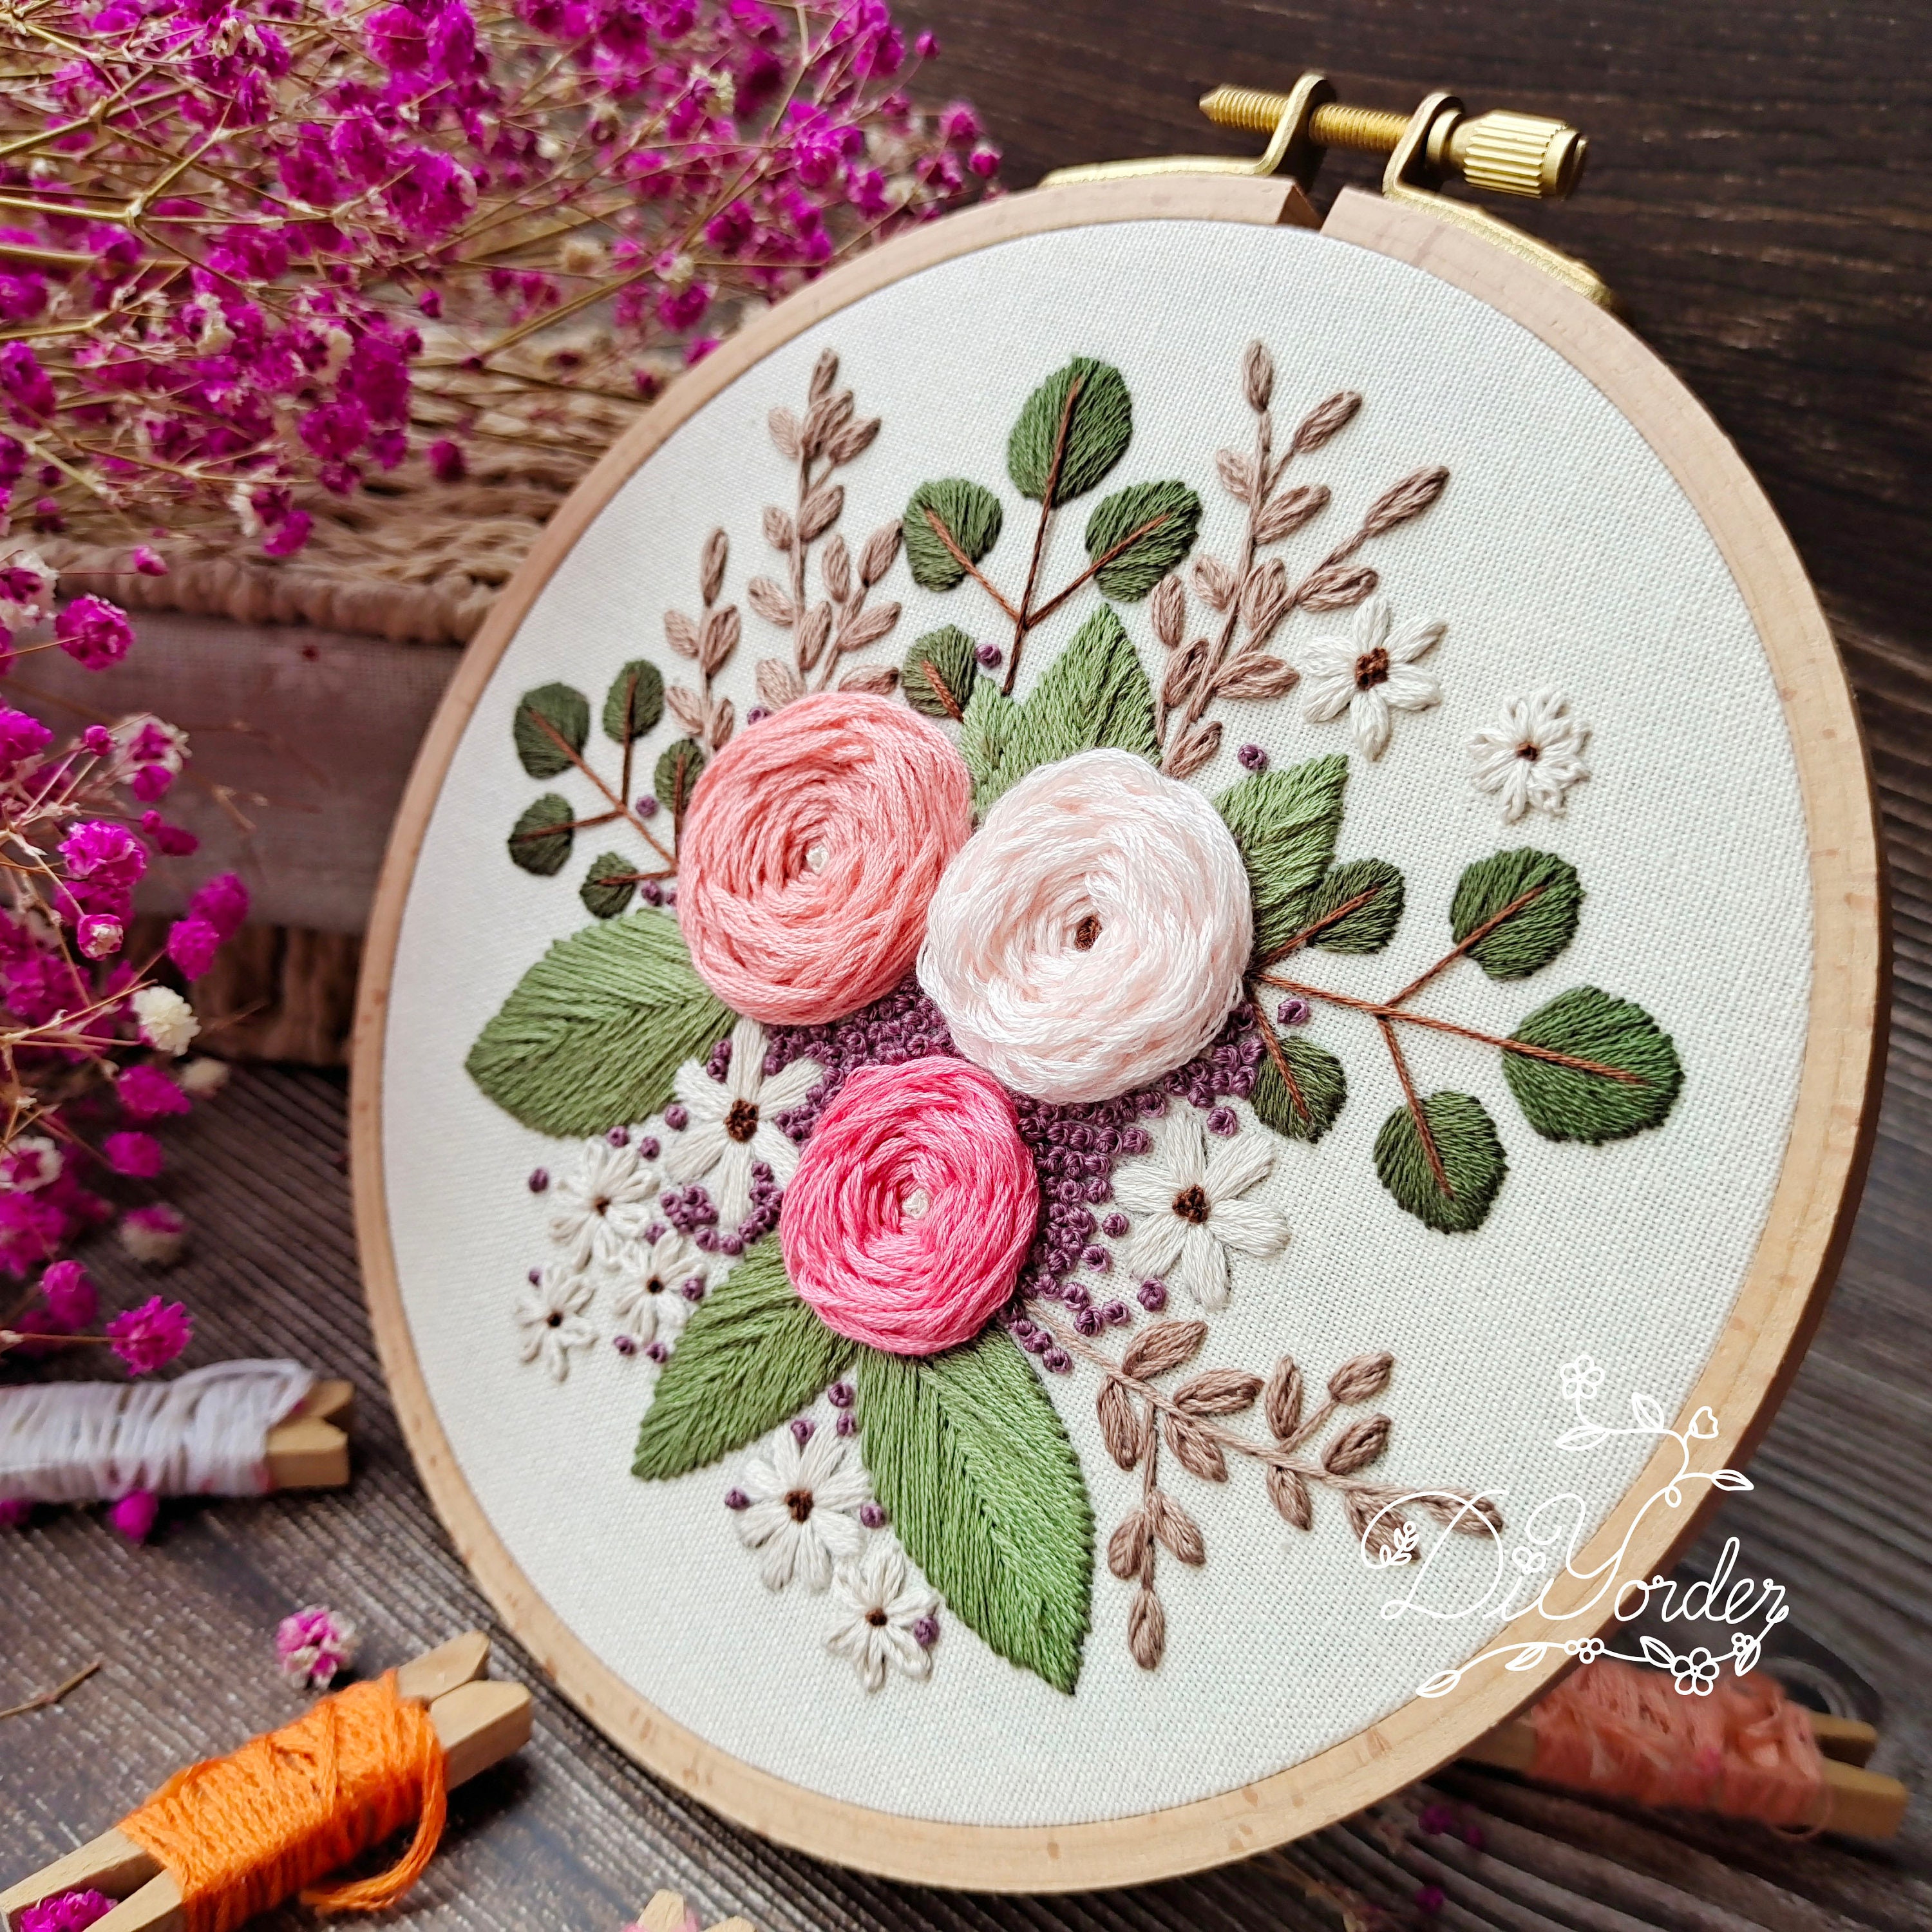 Embroidery Kit, Flowers Awesocrafts Full Range of Embroidery Starter Kits  for Beginners Adults Kids DIY Cross Stitch Handmade Easy Patterns (Flowers)